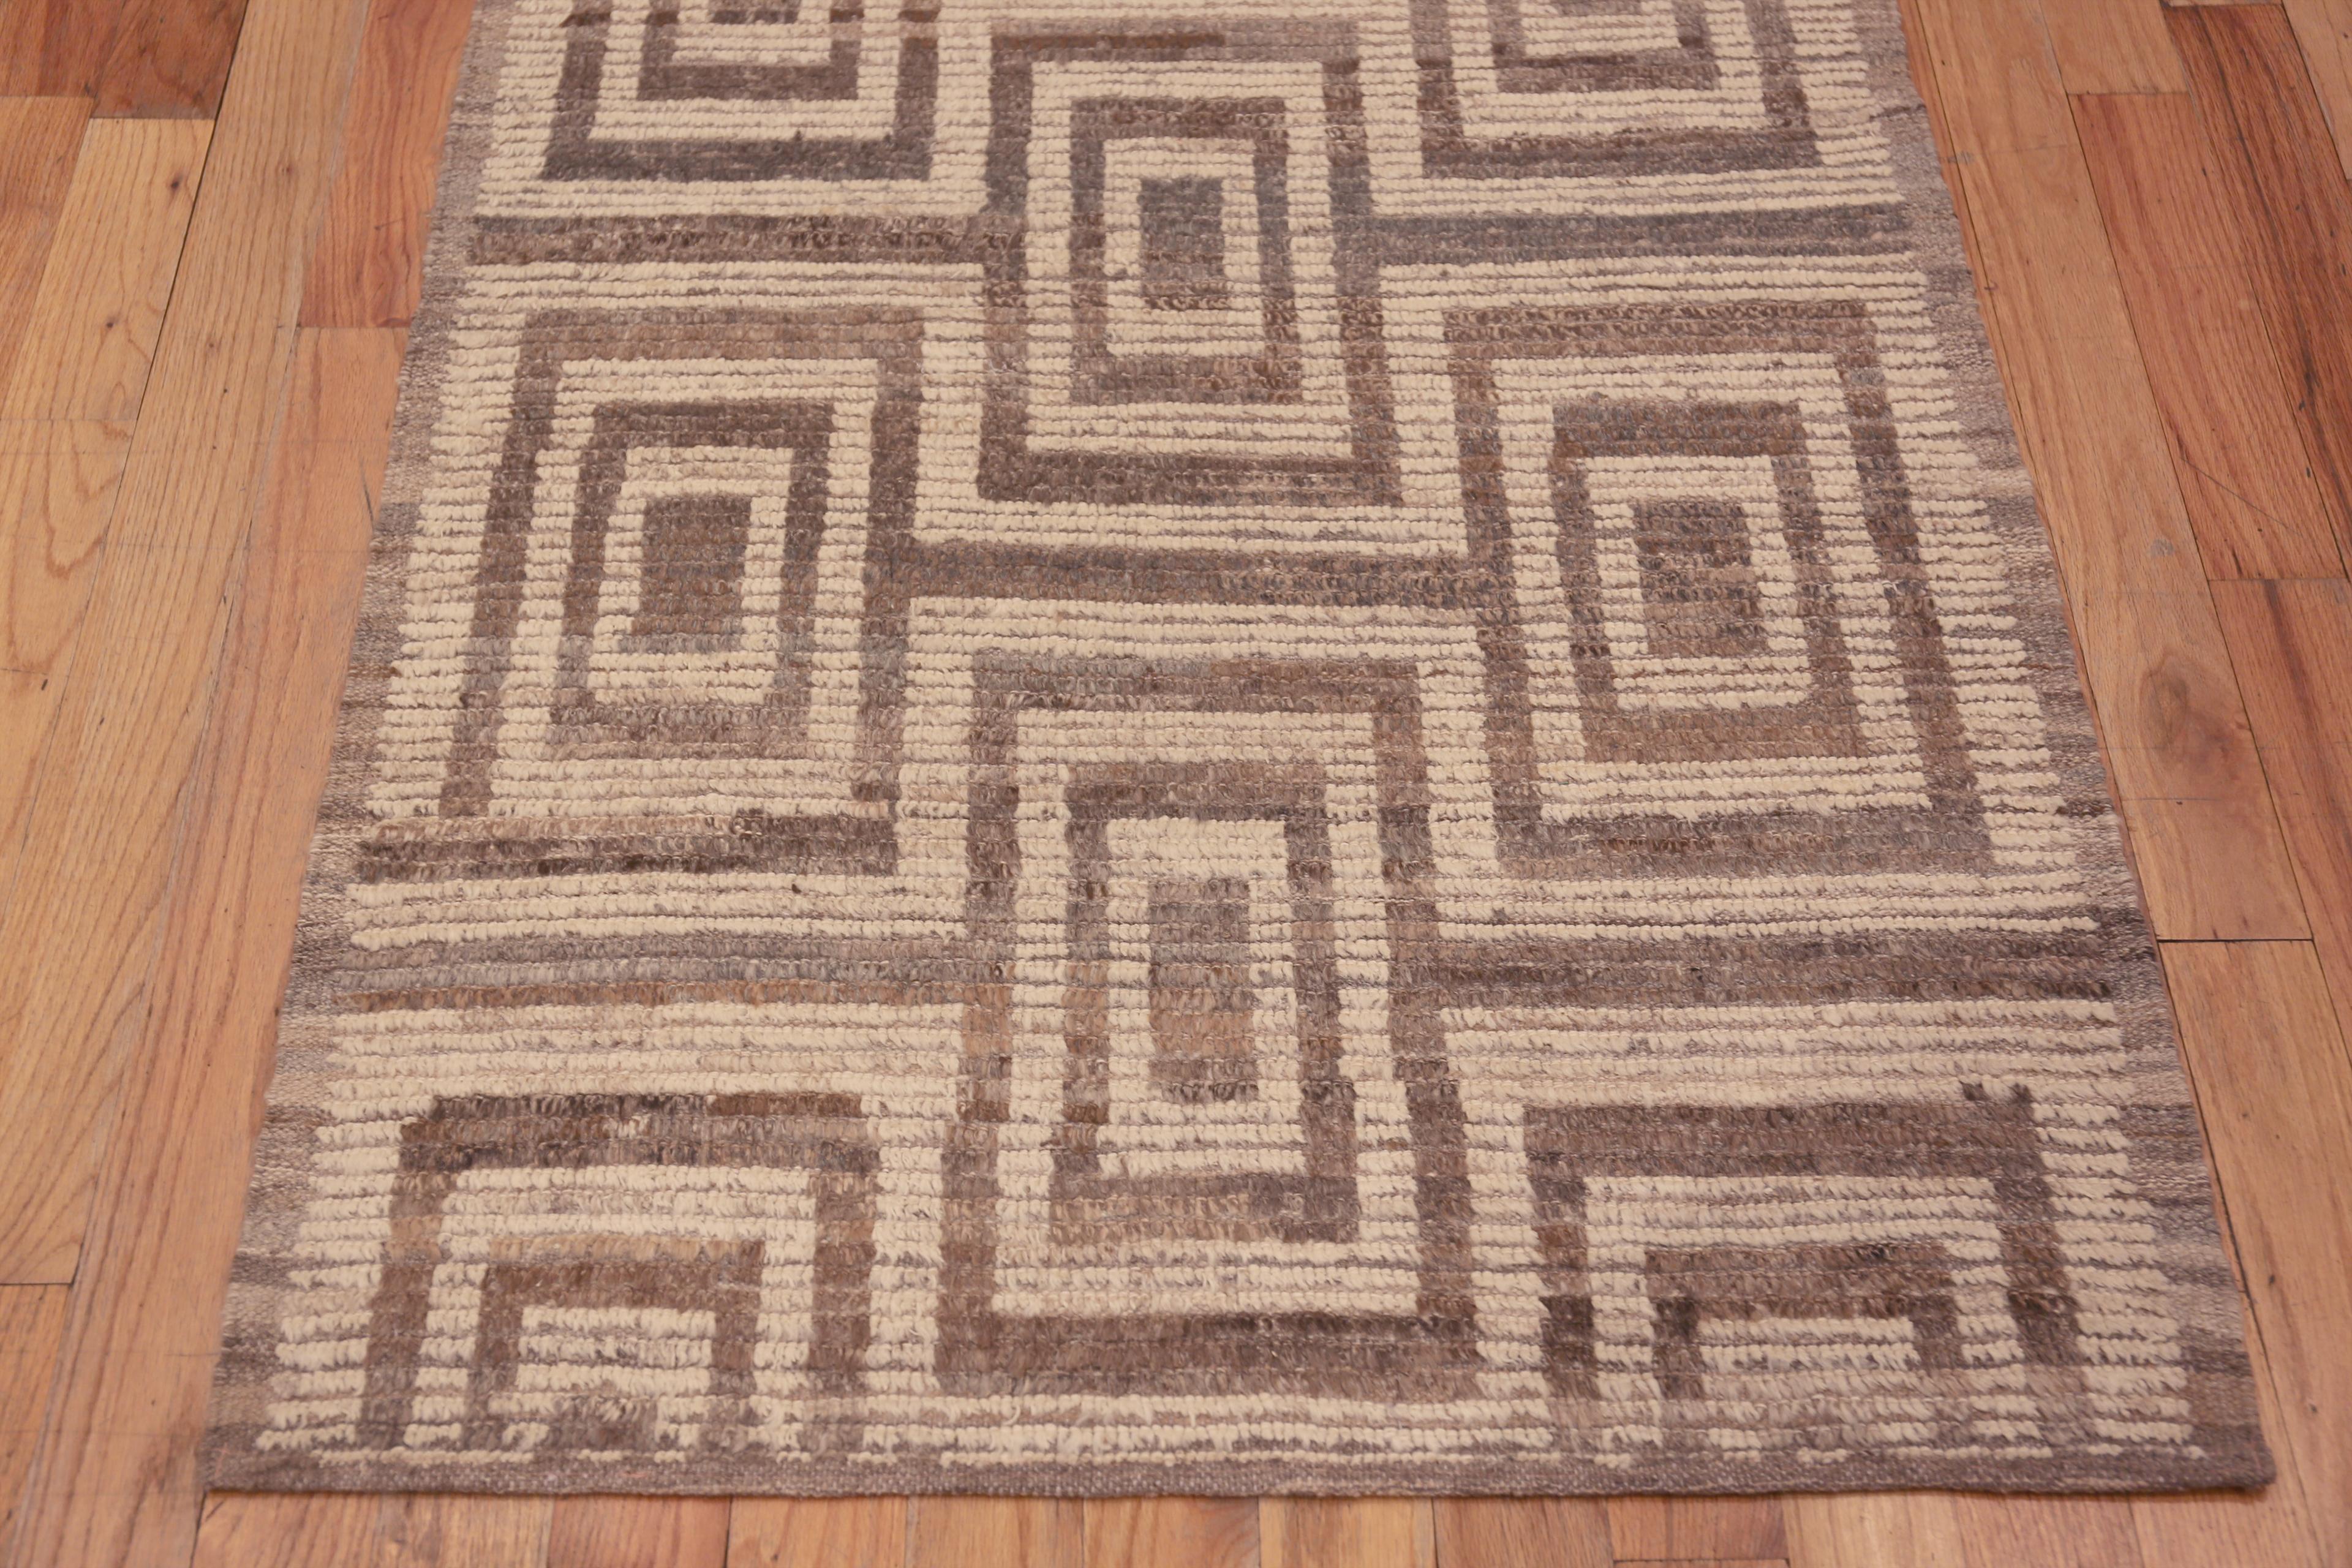 Central Asian Nazmiyal Collection Modern Neutral Tribal Geometric Runner Rug 3'4